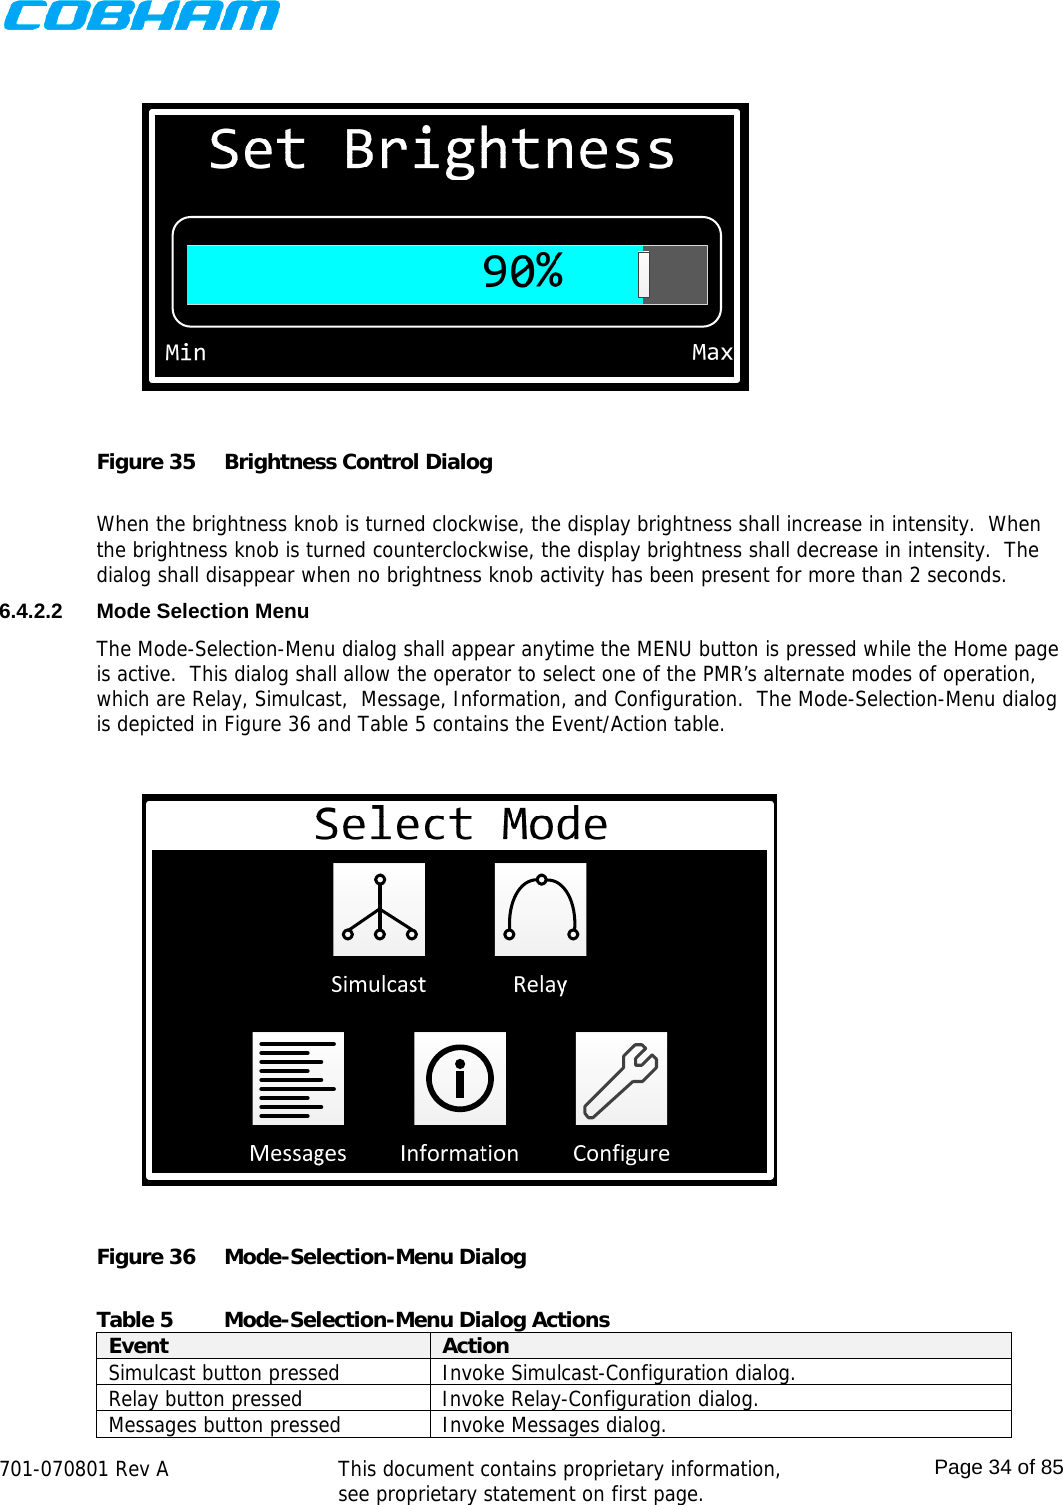    701-070801 Rev A   This document contains proprietary information, see proprietary statement on first page.  Page 34 of 85   Figure 35  Brightness Control Dialog  When the brightness knob is turned clockwise, the display brightness shall increase in intensity.  When the brightness knob is turned counterclockwise, the display brightness shall decrease in intensity.  The dialog shall disappear when no brightness knob activity has been present for more than 2 seconds. 6.4.2.2  Mode Selection Menu The Mode-Selection-Menu dialog shall appear anytime the MENU button is pressed while the Home page is active.  This dialog shall allow the operator to select one of the PMR’s alternate modes of operation, which are Relay, Simulcast,  Message, Information, and Configuration.  The Mode-Selection-Menu dialog is depicted in Figure 36 and Table 5 contains the Event/Action table.  Figure 36  Mode-Selection-Menu Dialog  Table 5  Mode-Selection-Menu Dialog Actions Event  Action Simulcast button pressed  Invoke Simulcast-Configuration dialog. Relay button pressed  Invoke Relay-Configuration dialog. Messages button pressed  Invoke Messages dialog. 